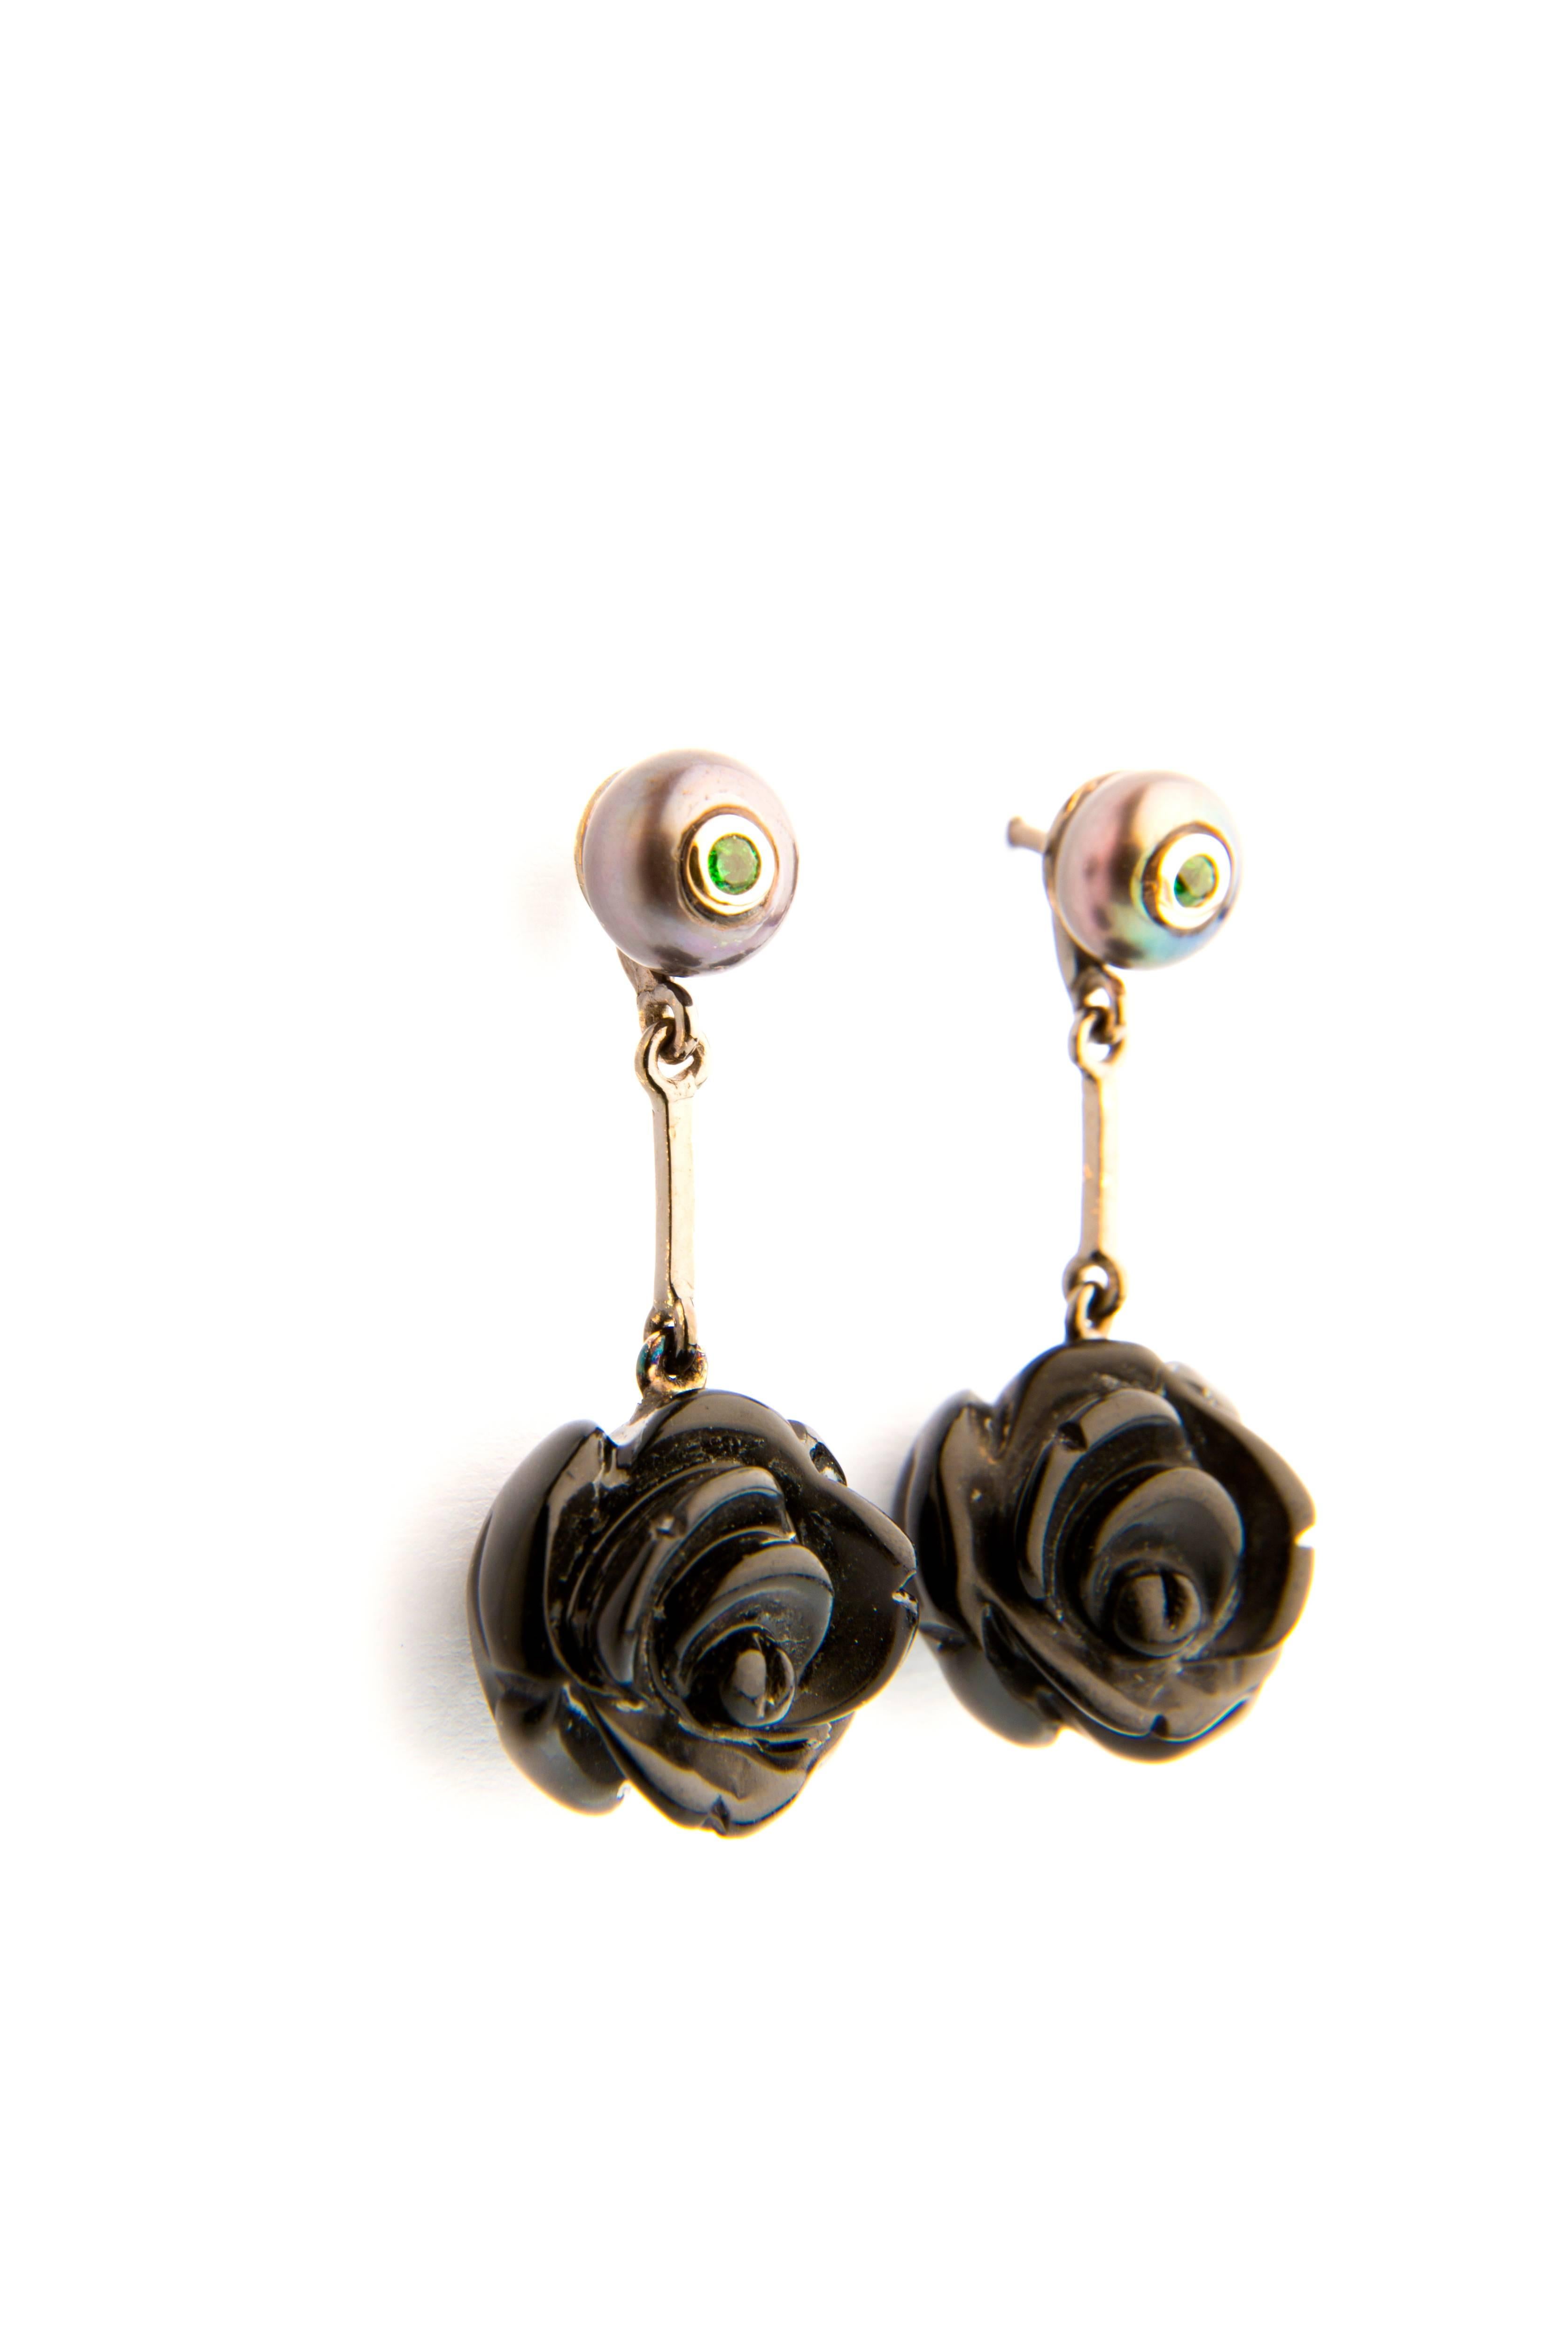 Contemporary Rose Shaped Onxy Dangle Earrings with Tsavorites and Pearls in 18 Karat Gold For Sale